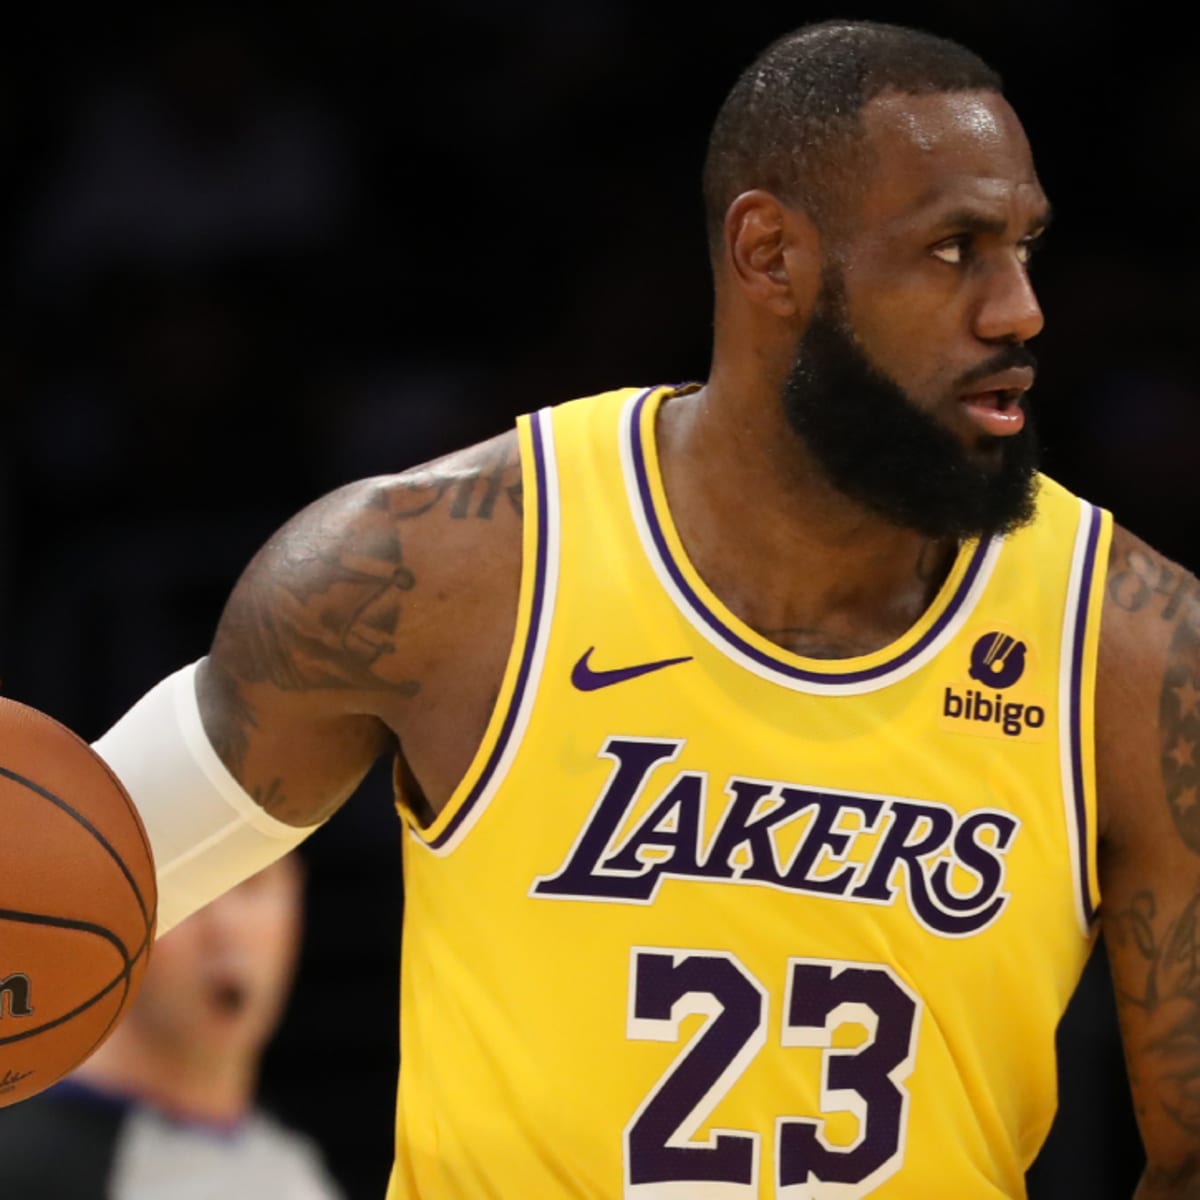 Why did Lakers' LeBron James switch his jersey number from 23 to 6